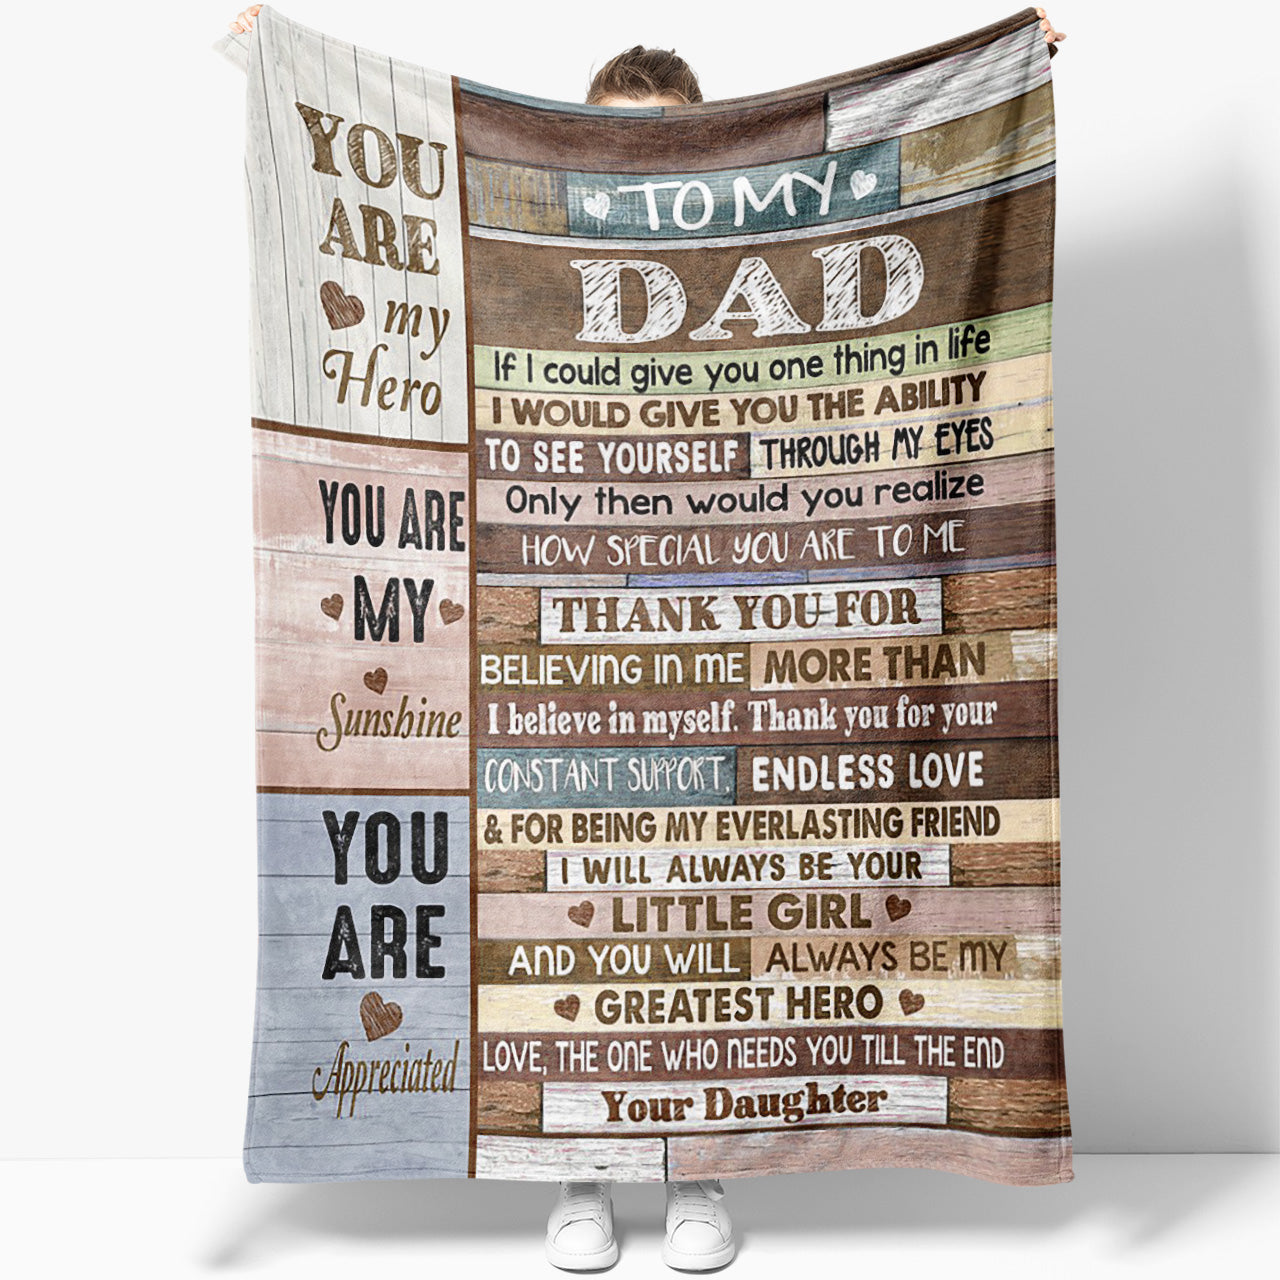 Blanket Gift for Dad, Thank You for Constant Support Endless Love Blanket for Father's Day